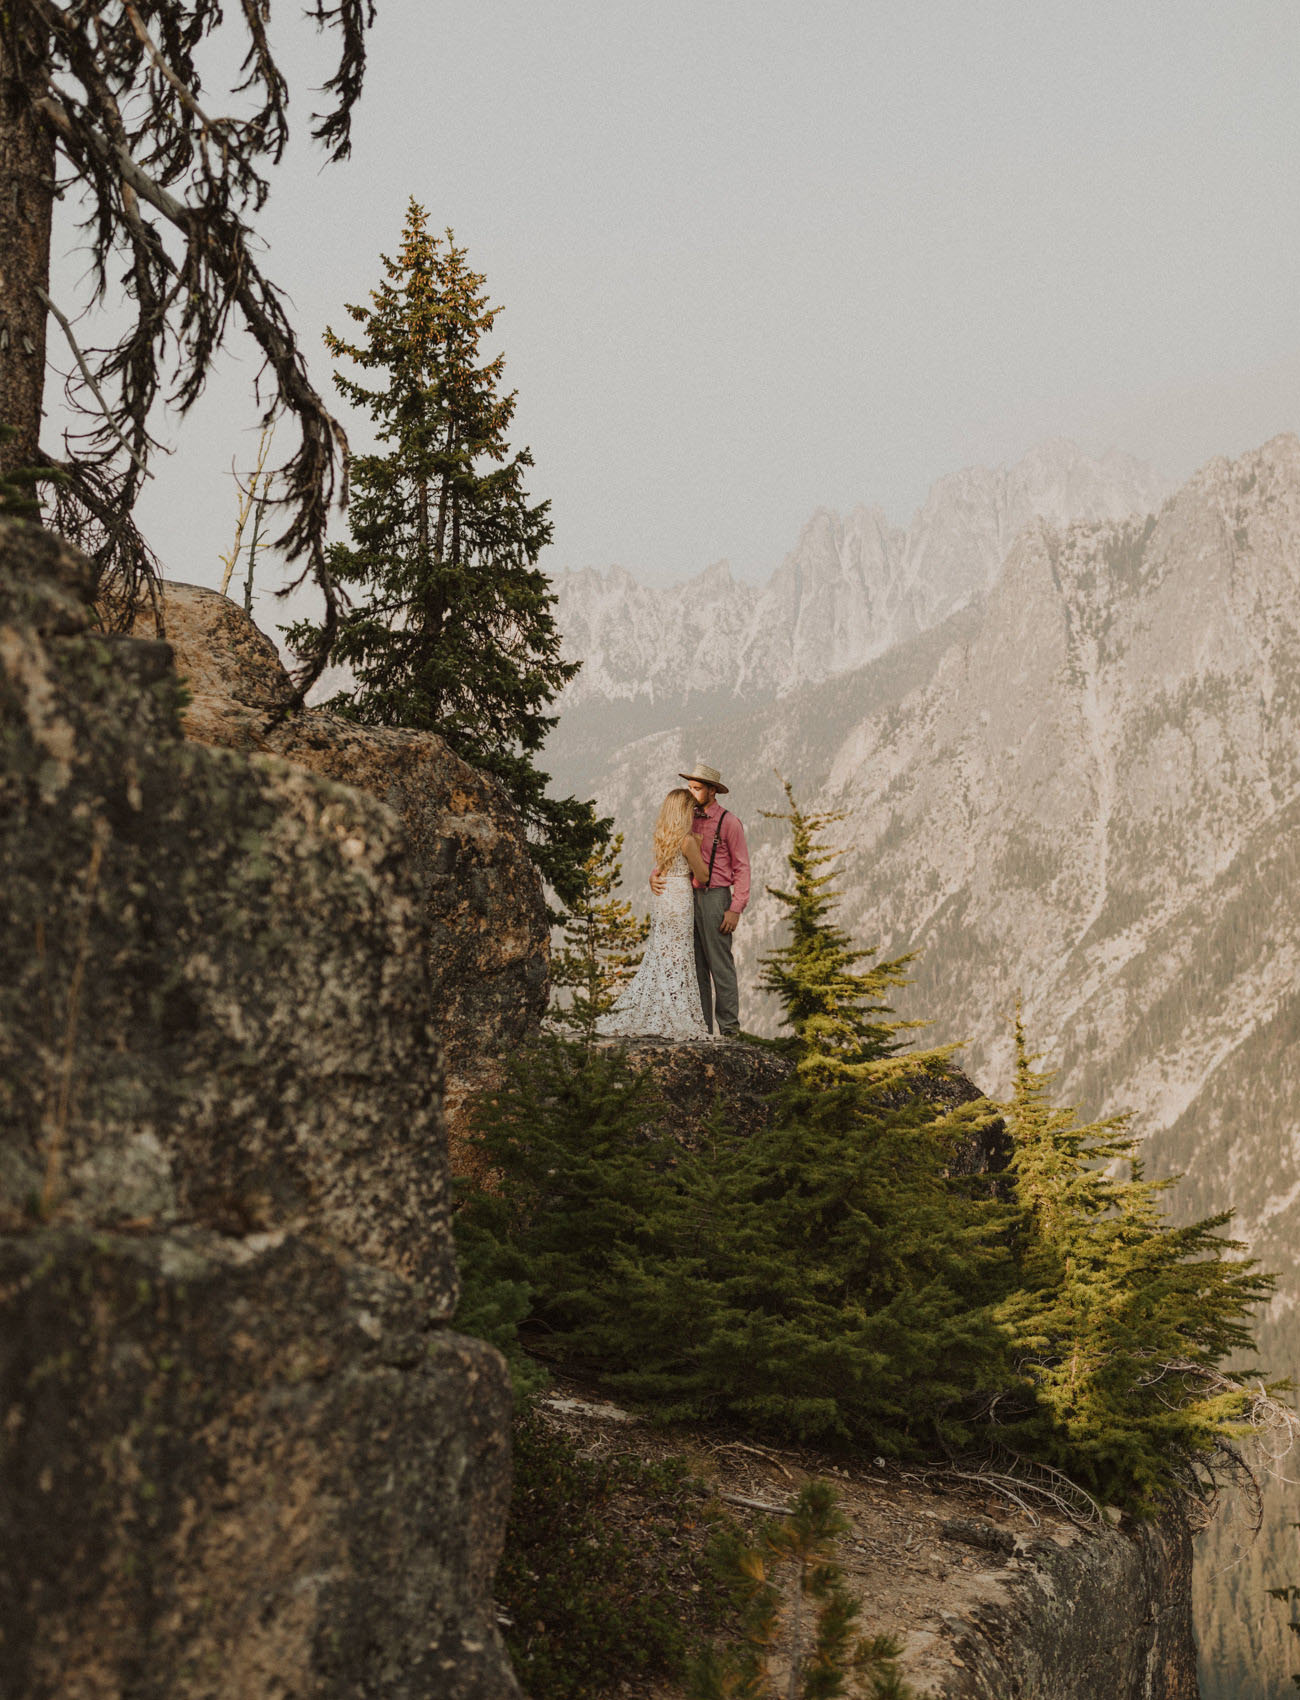 elope in a national park